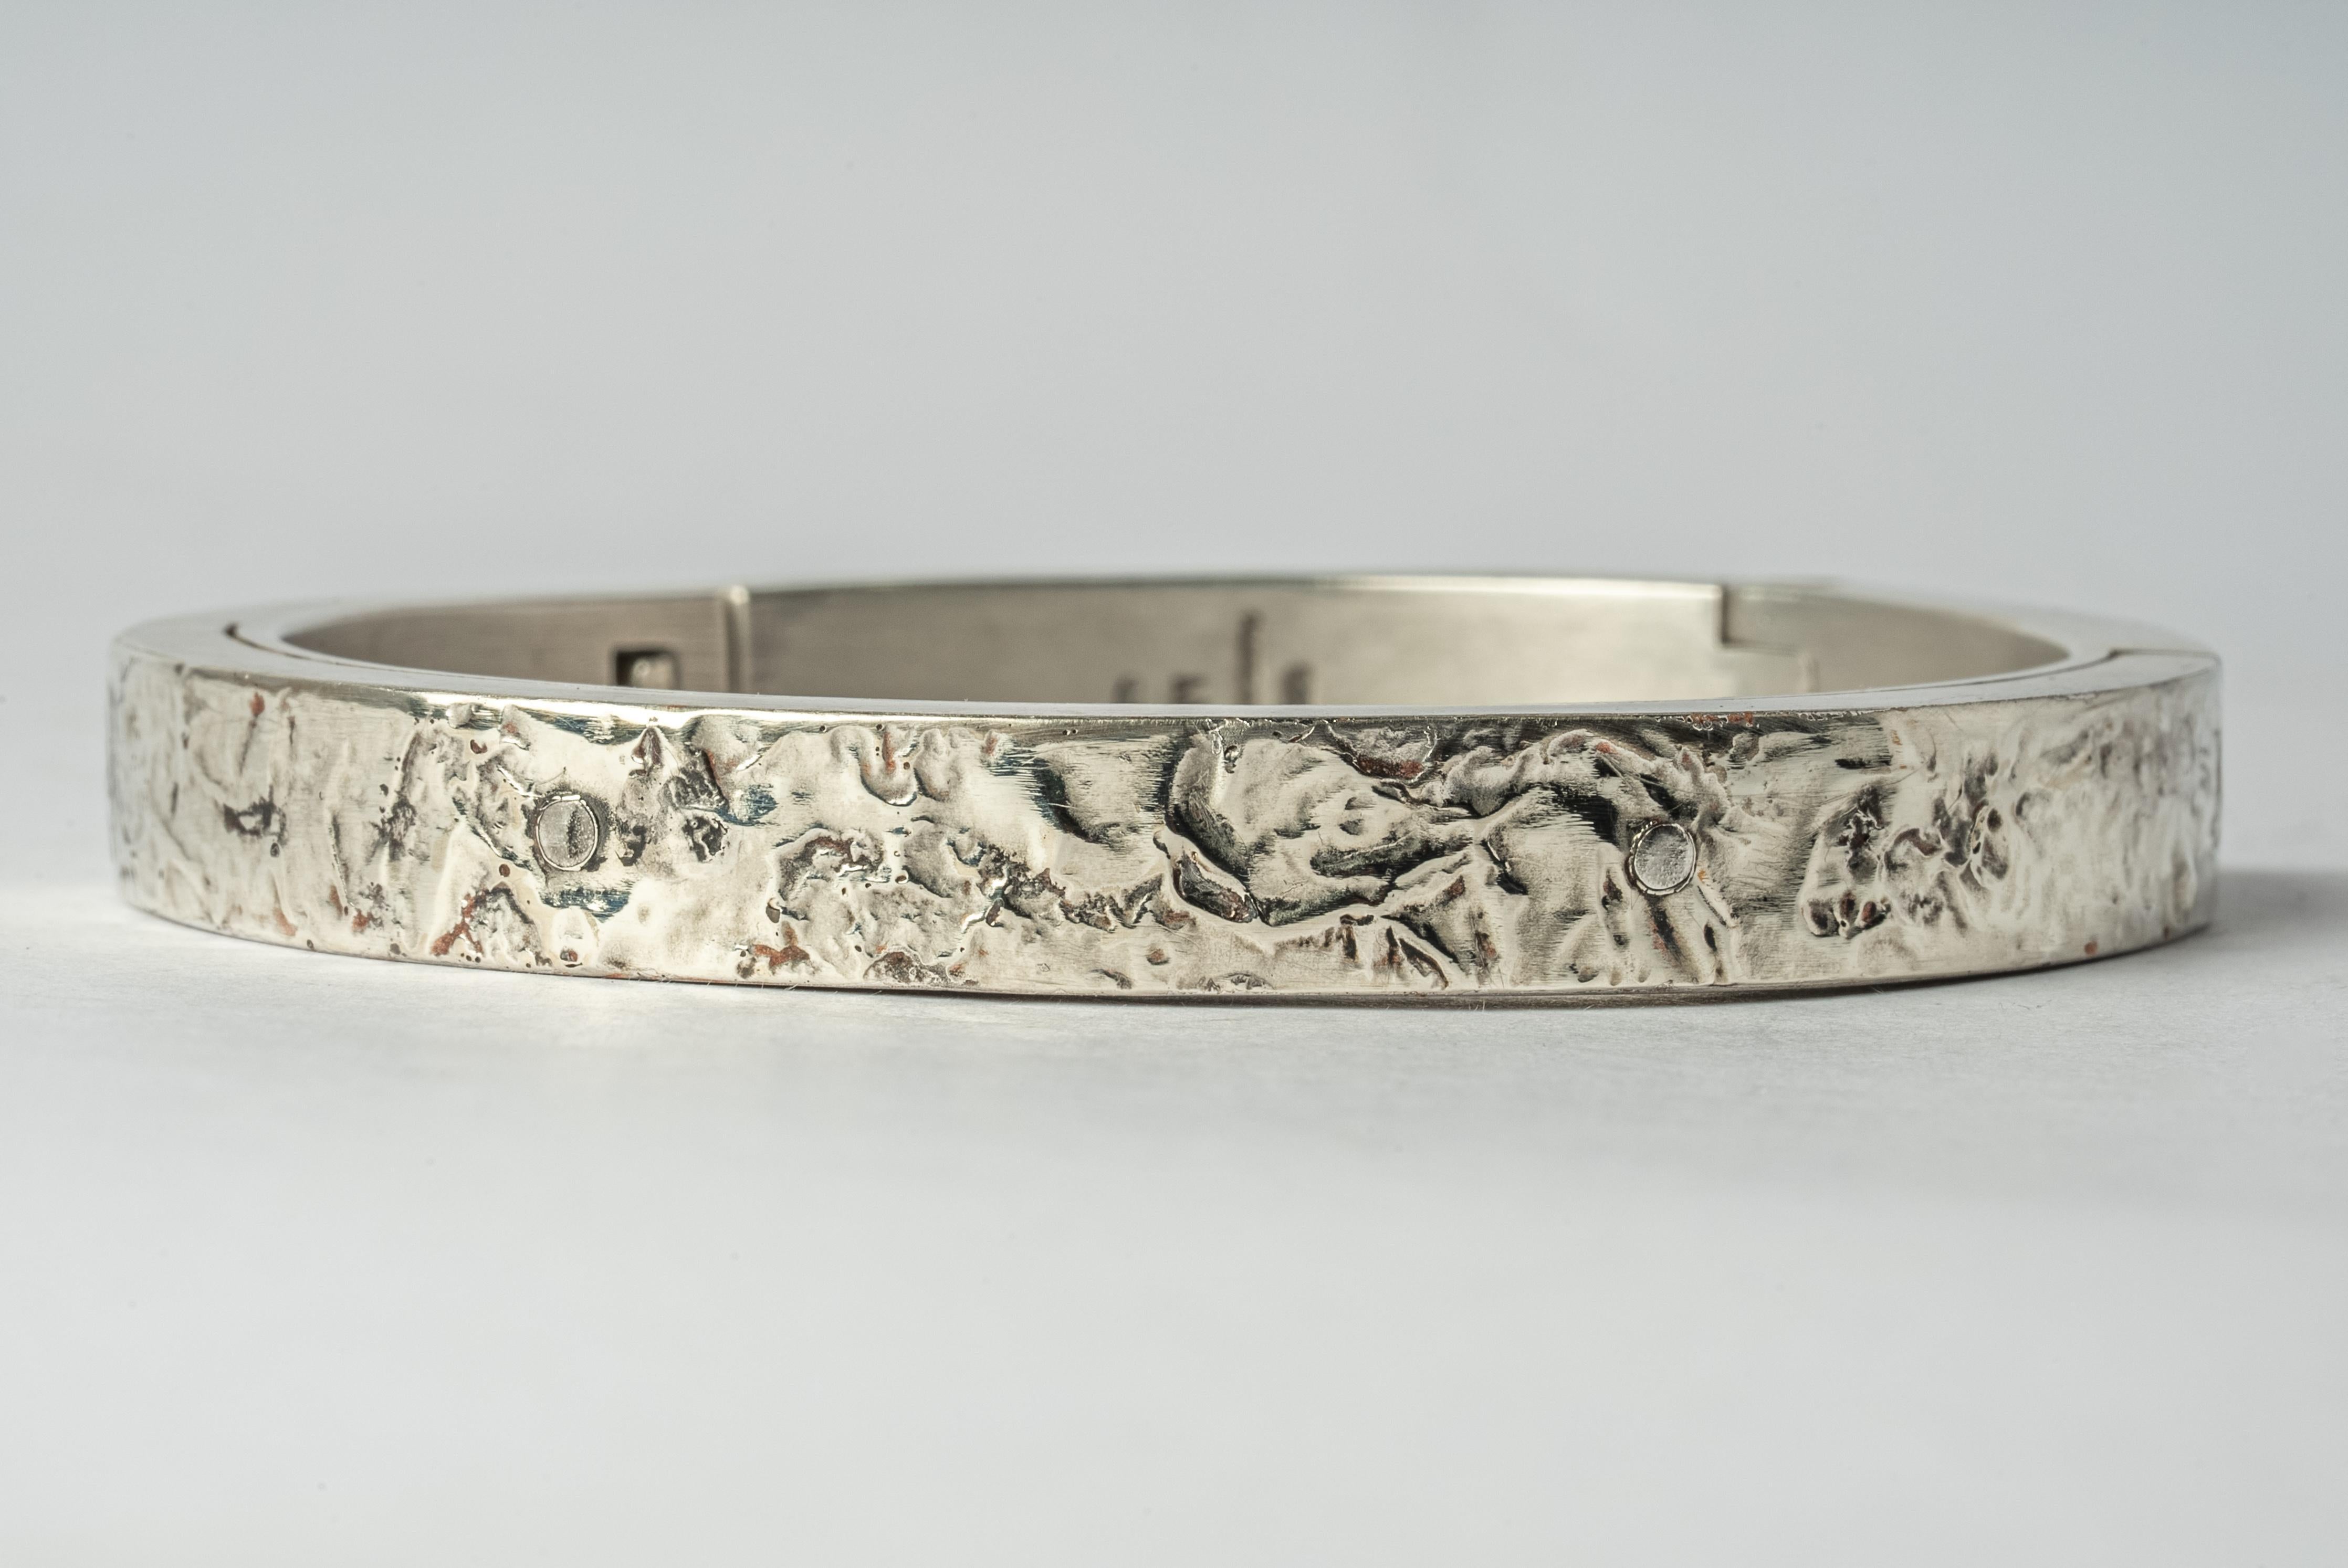 Sistema bracelet in sterling silver and 10k solid white gold layer fused on the surface. The 